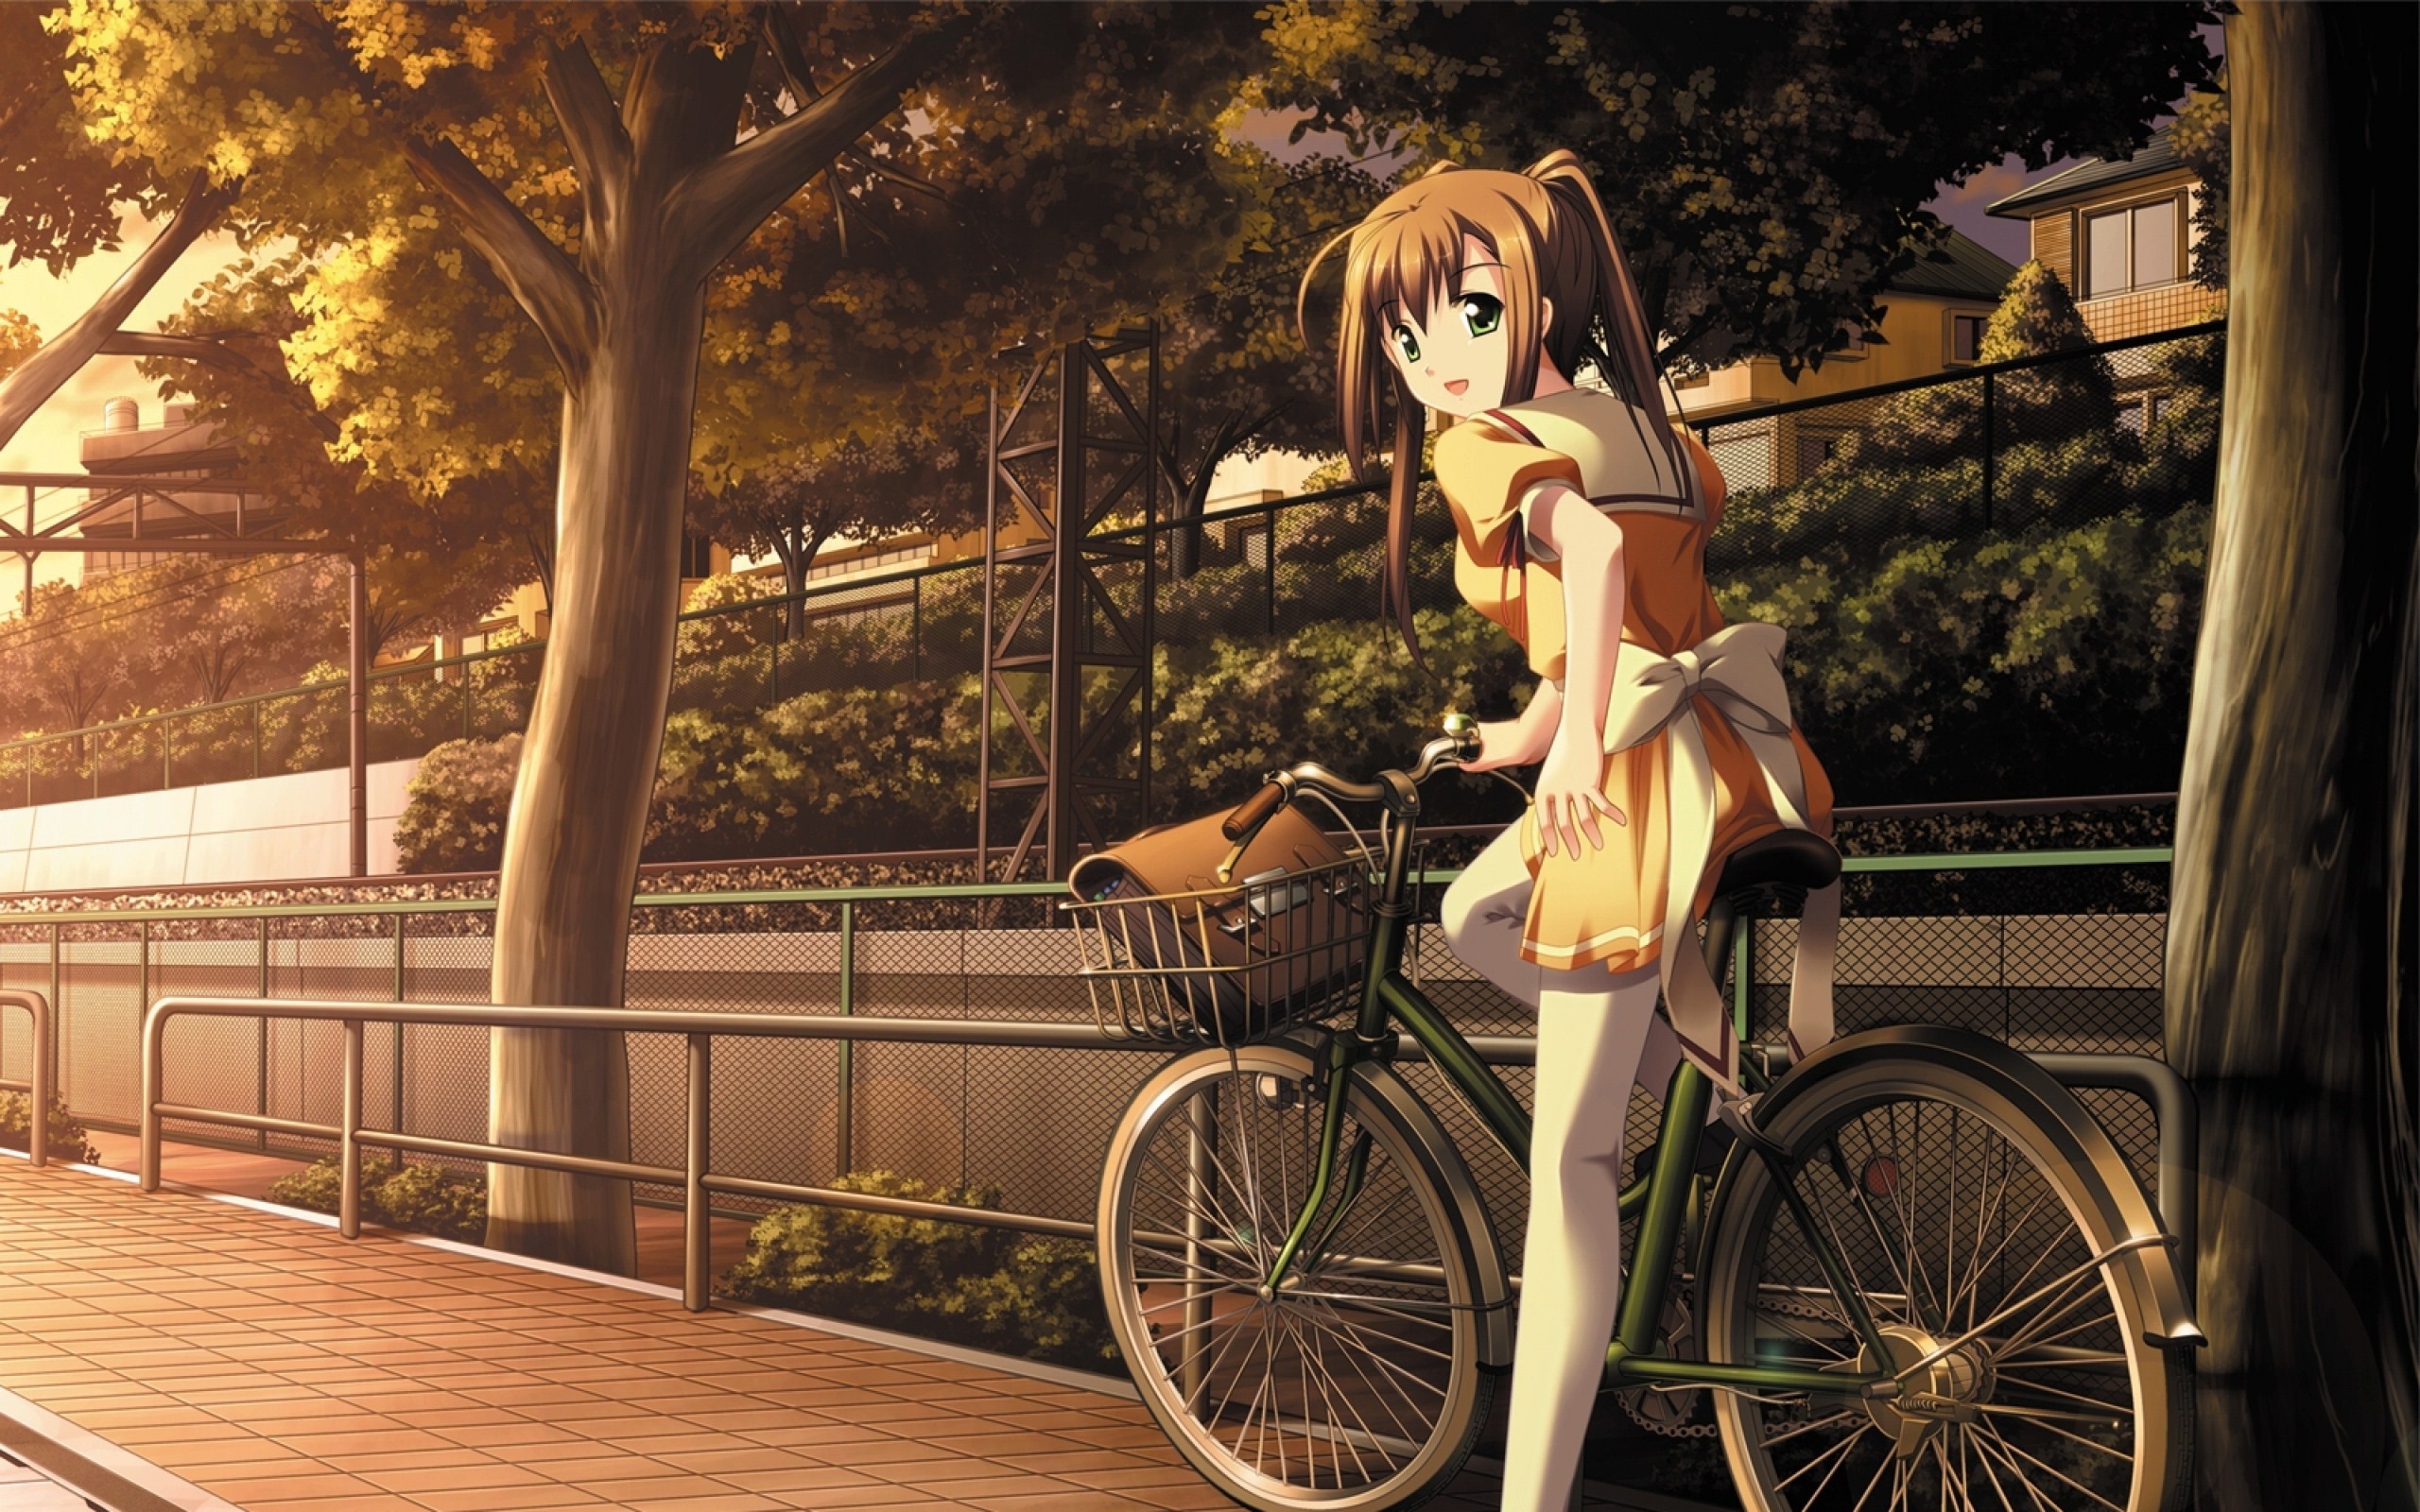 Anime Girl With Cycle - 2560x1600 Wallpaper 